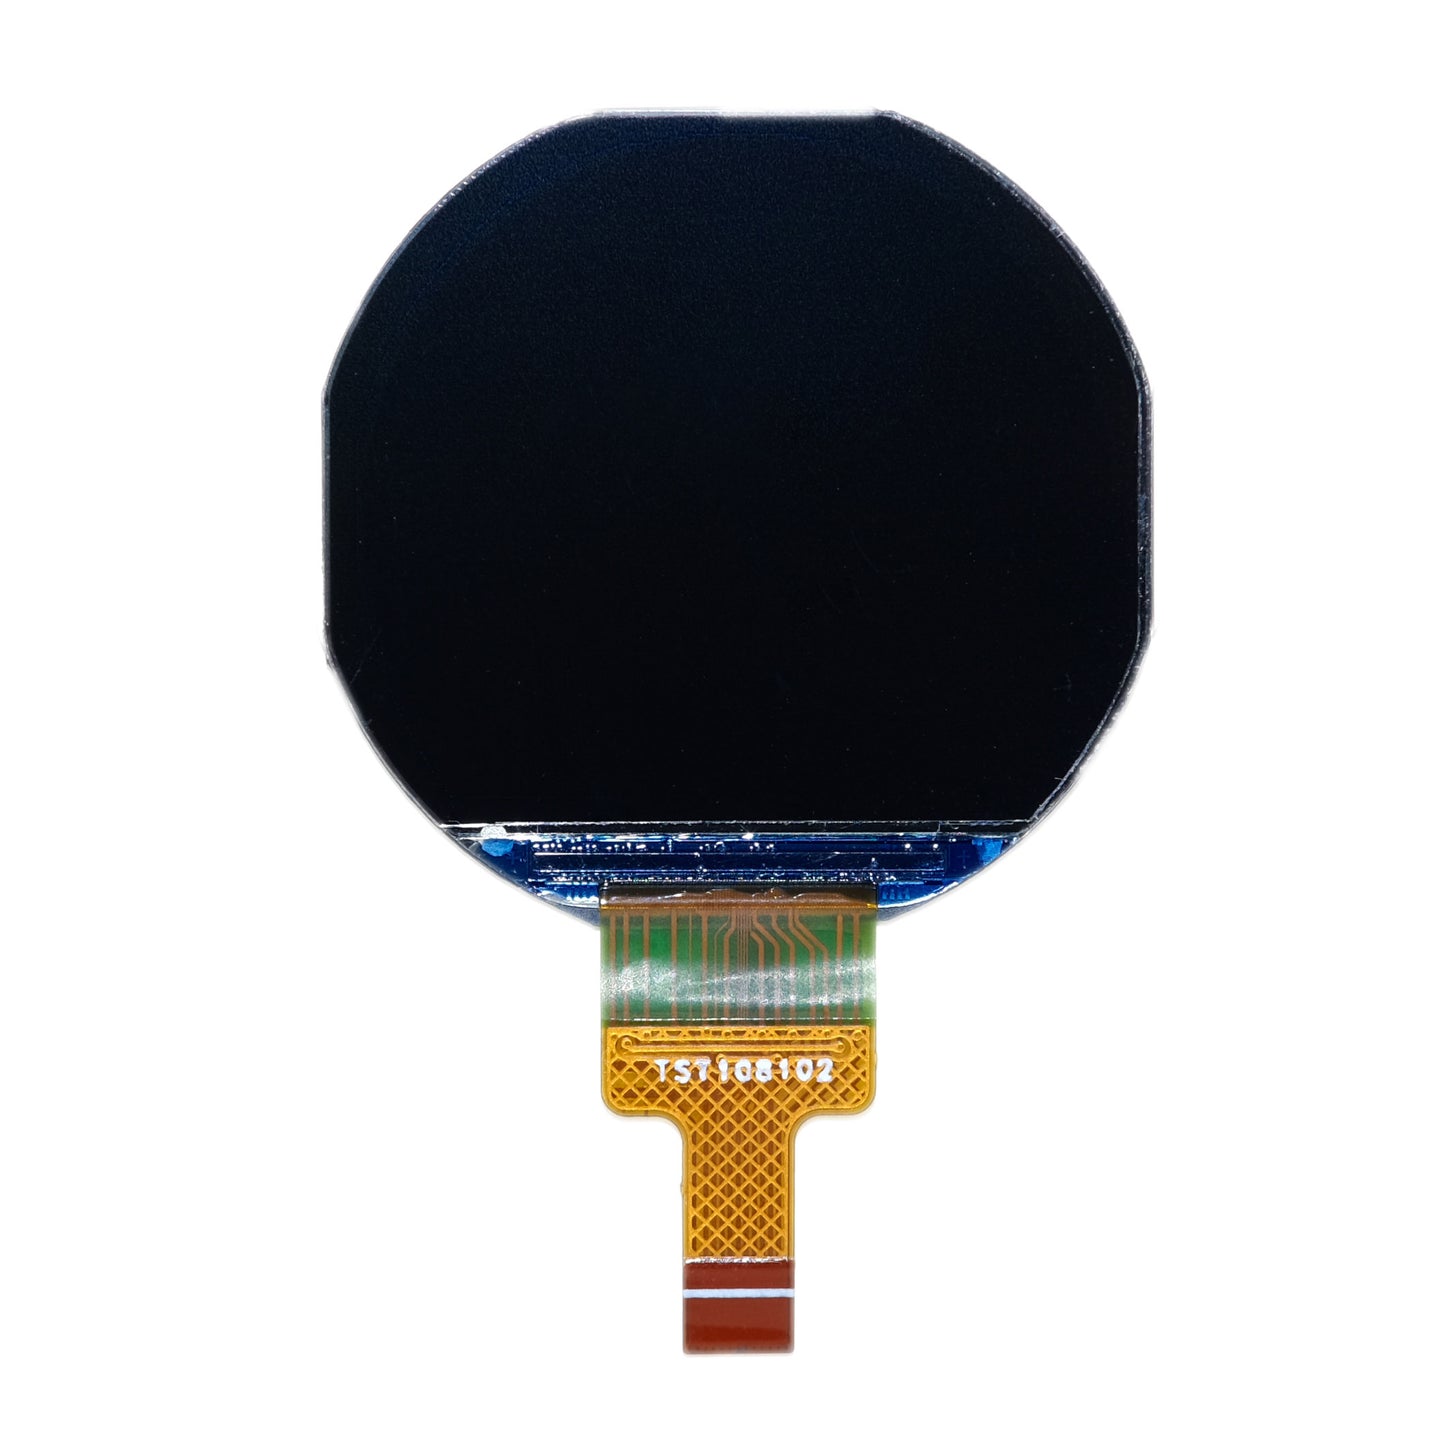 1.08-inch IPS Round Display Panel with 240x210 resolution and transmissive technology